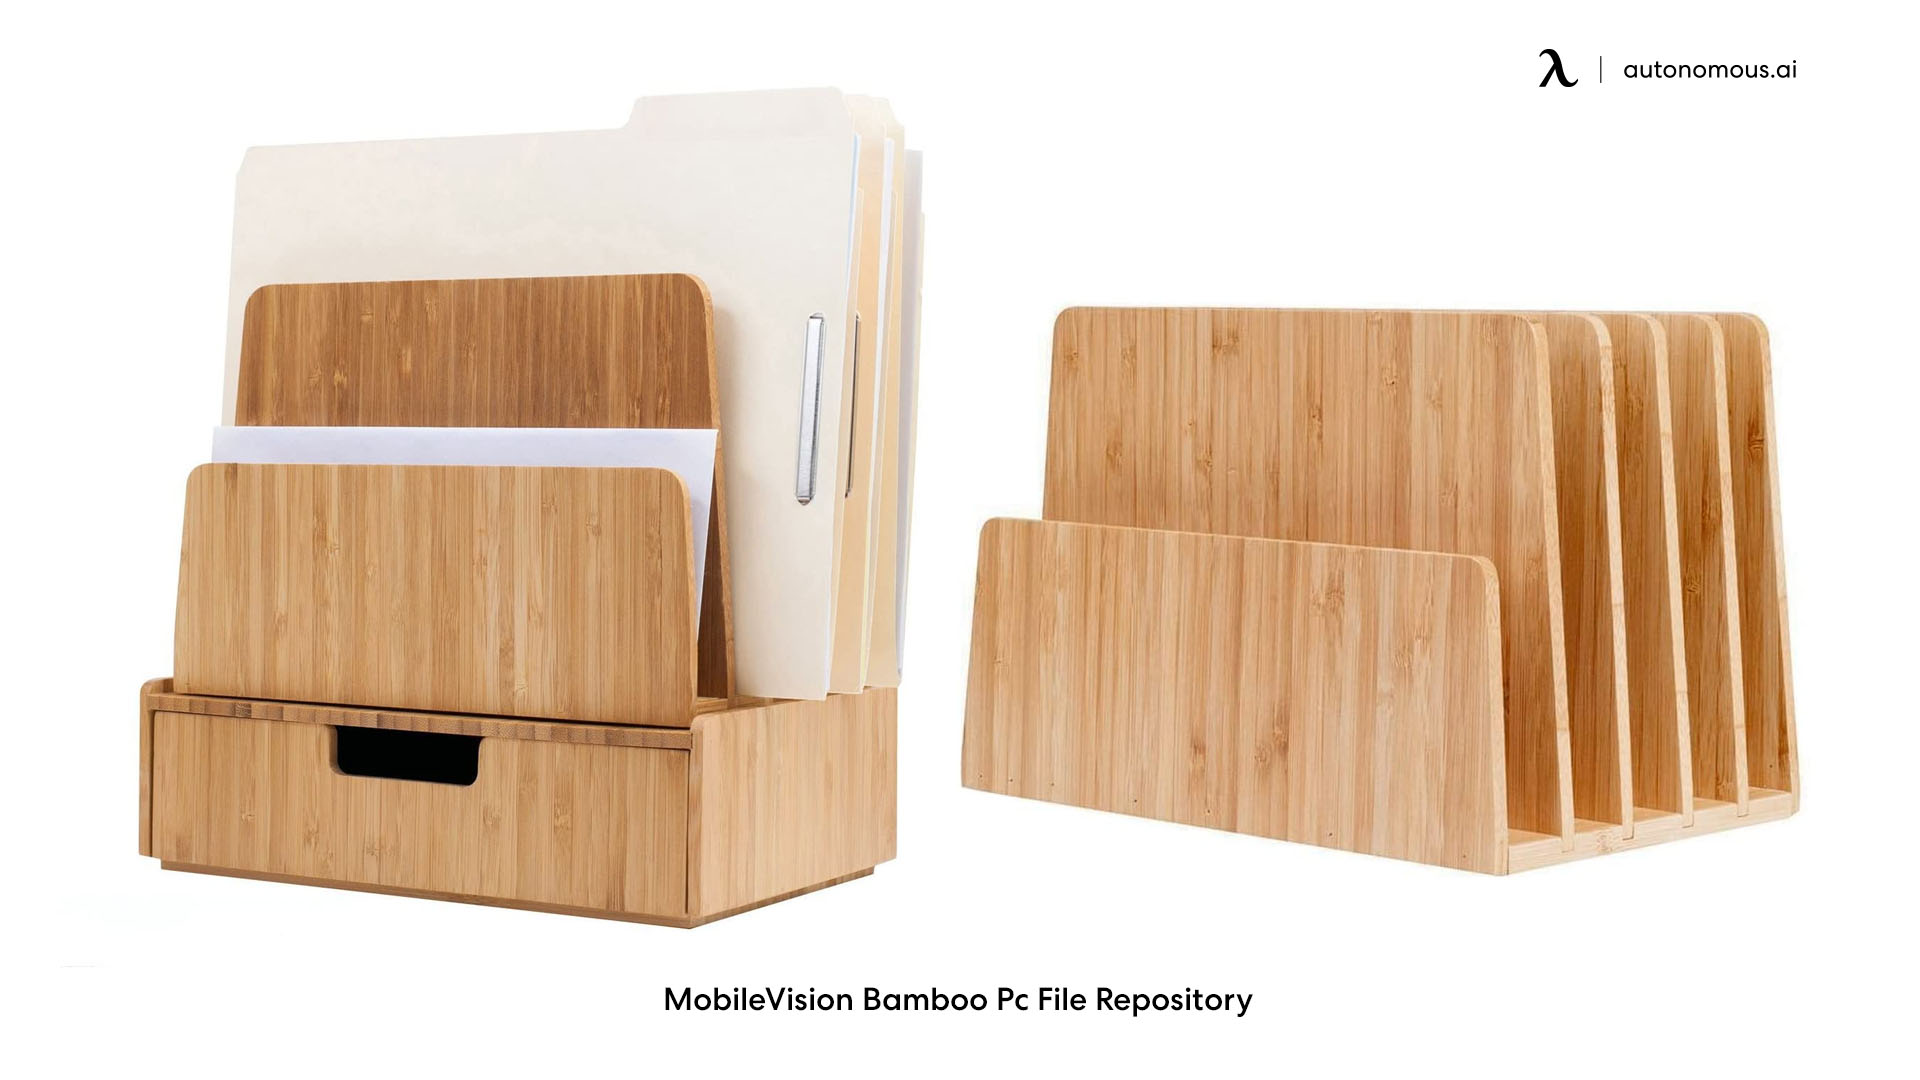 MobileVision Bamboo Pc File Repository